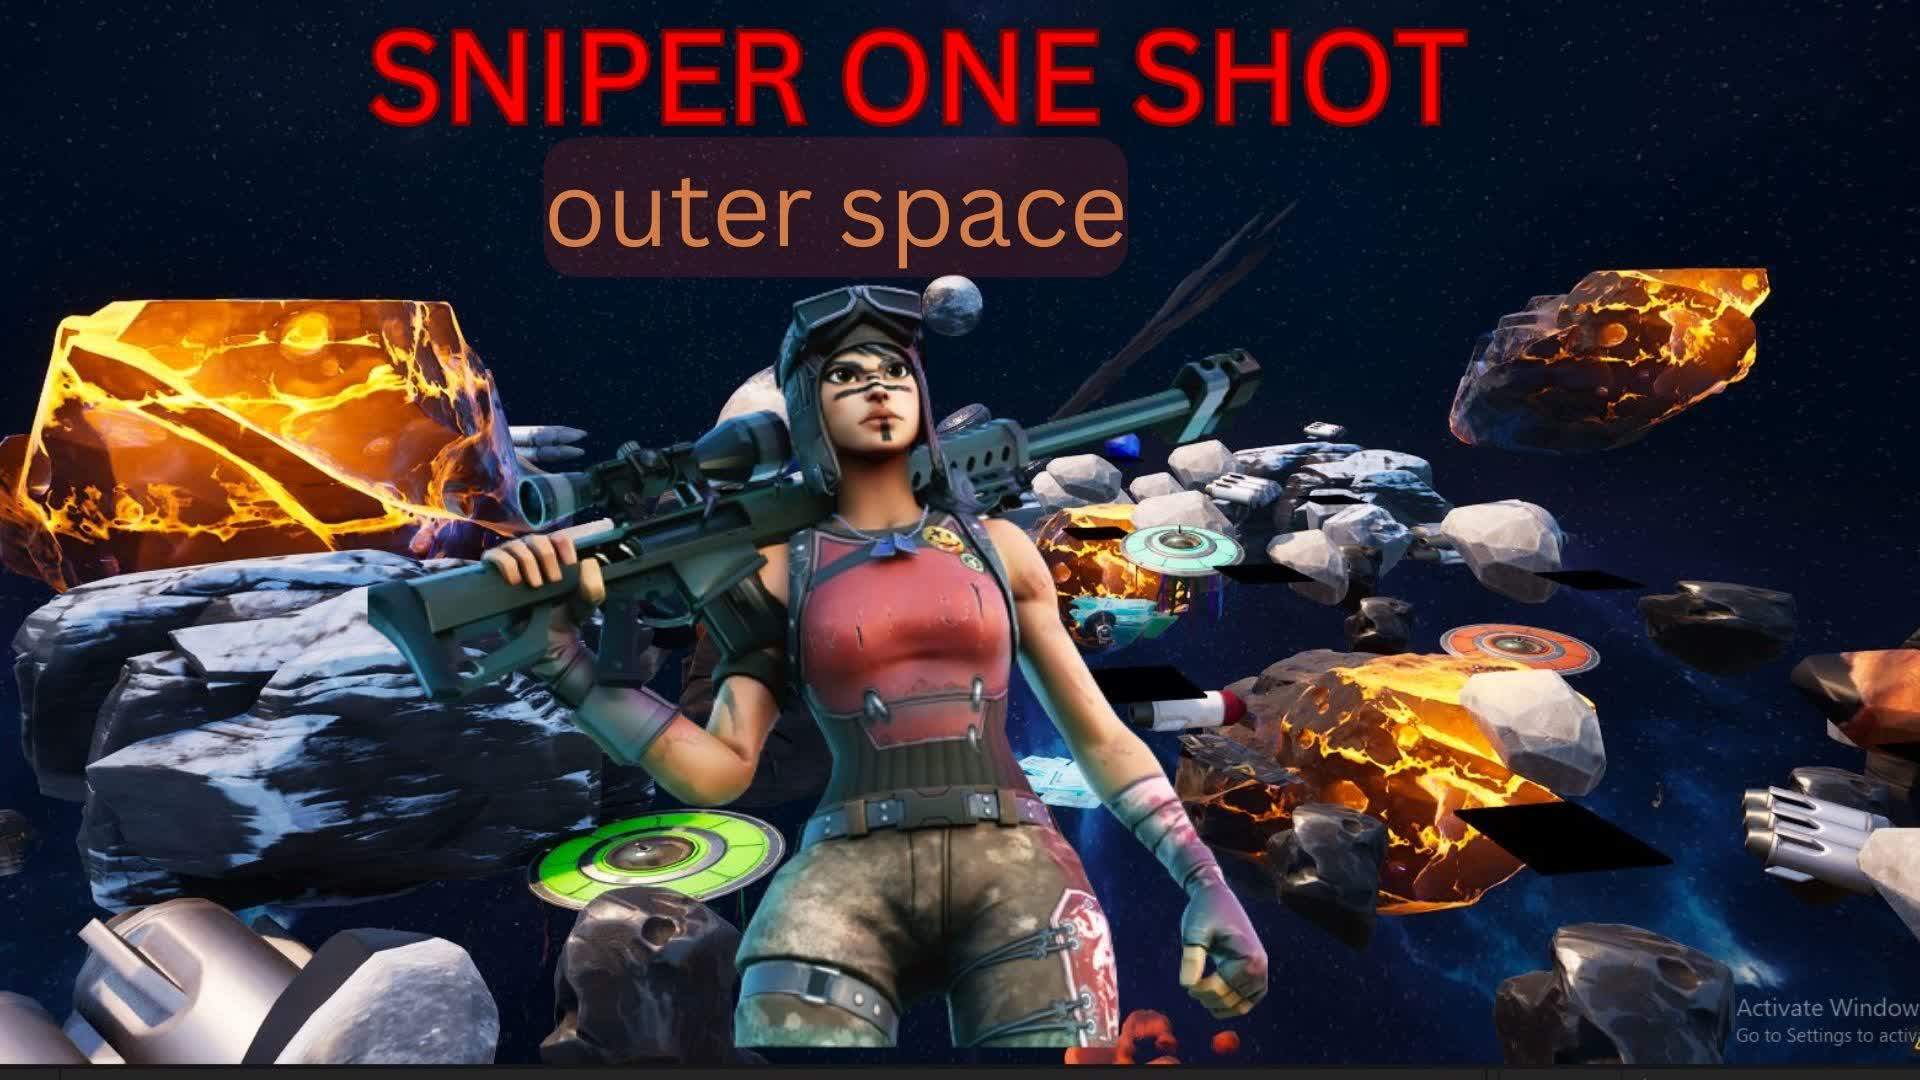 SNIPER ONE SHOT(outer space)